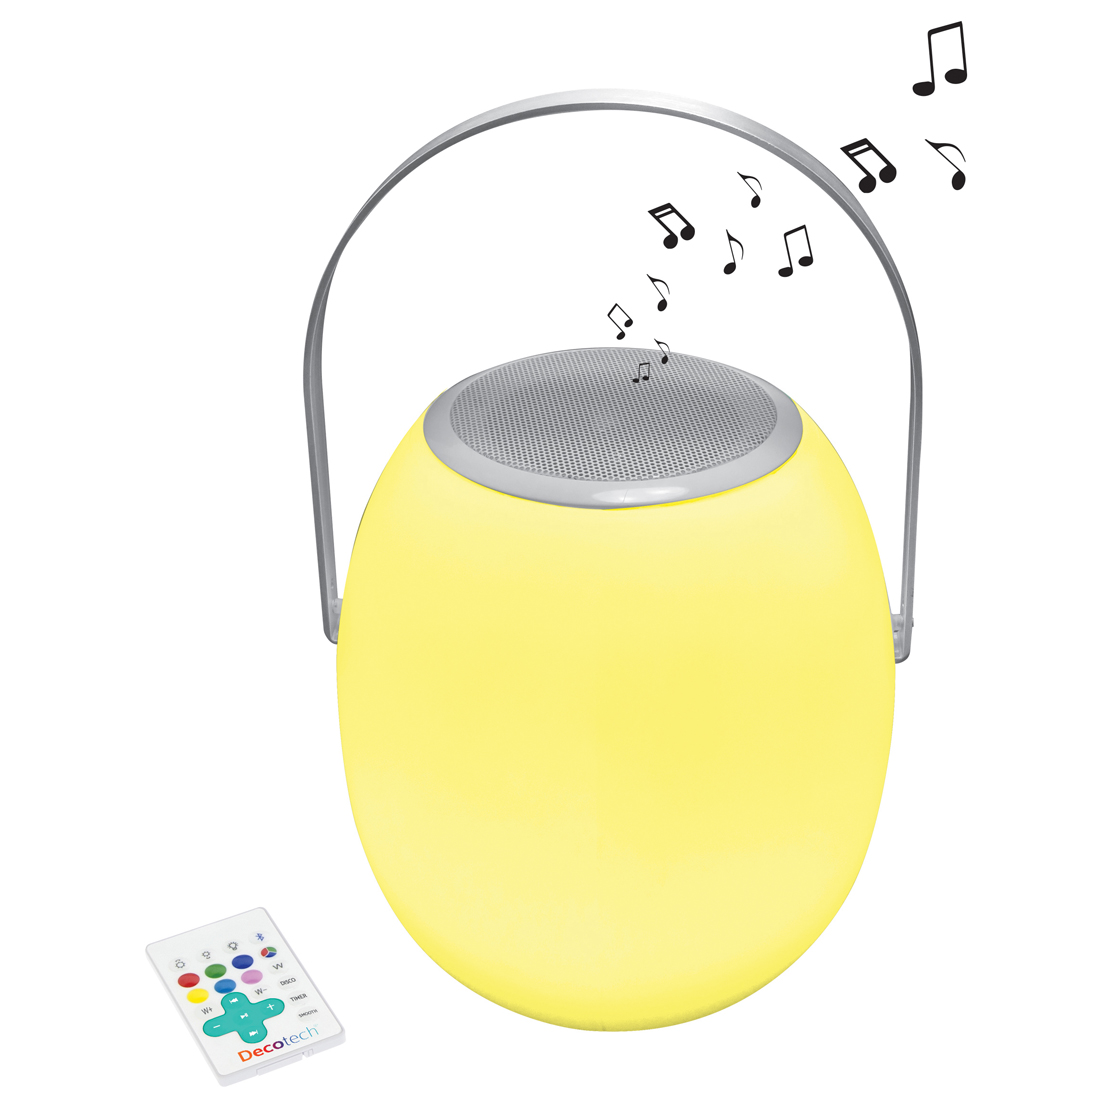 Bluetooth® Light Speaker with handle, color change